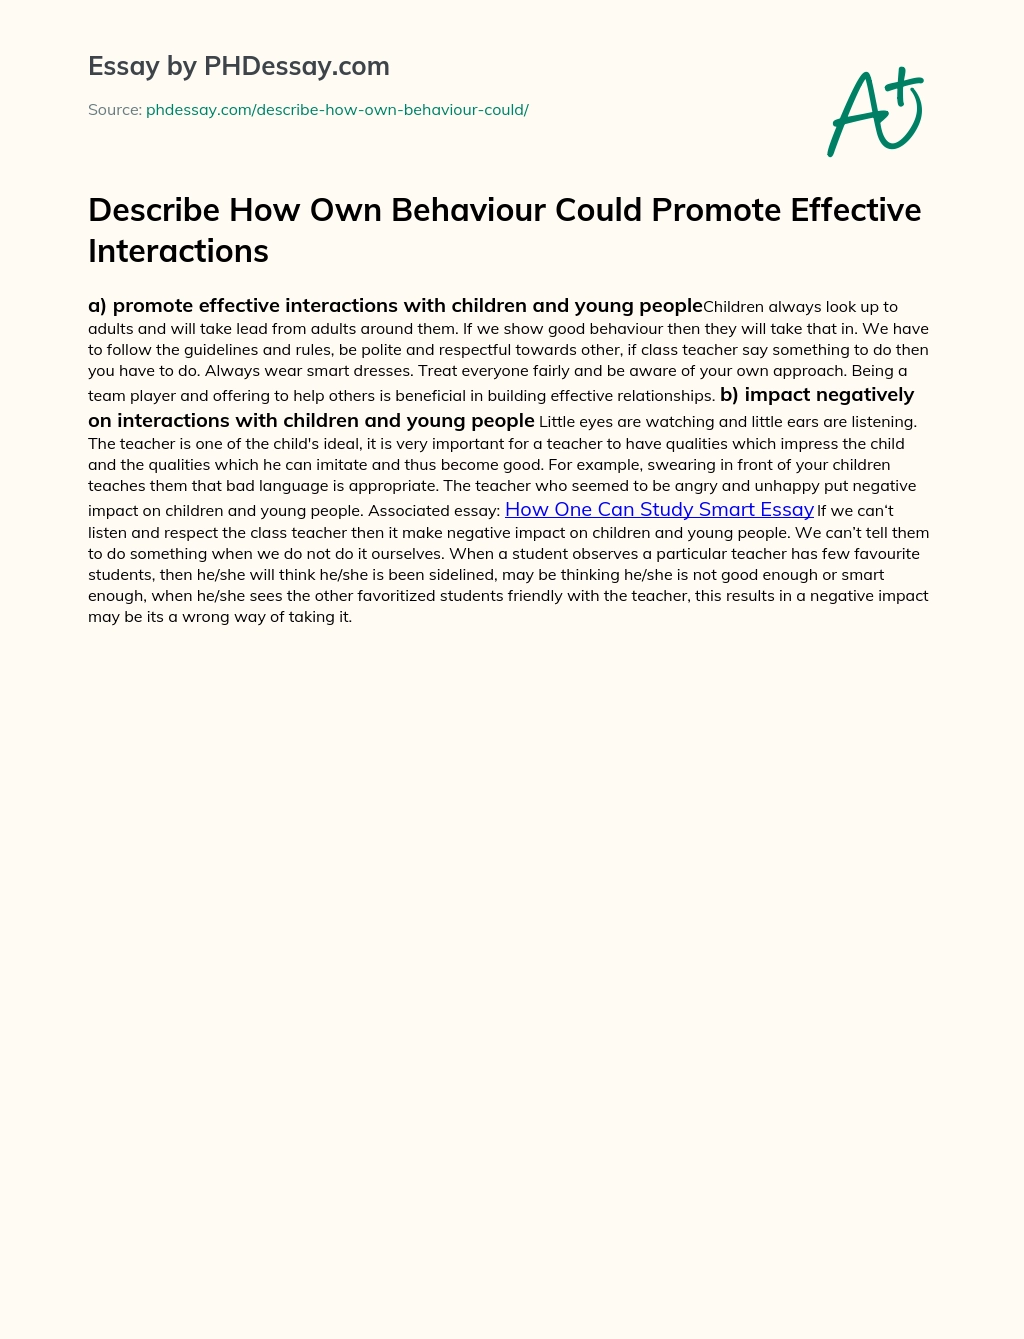 Describe How Own Behaviour Could Promote Effective Interactions essay